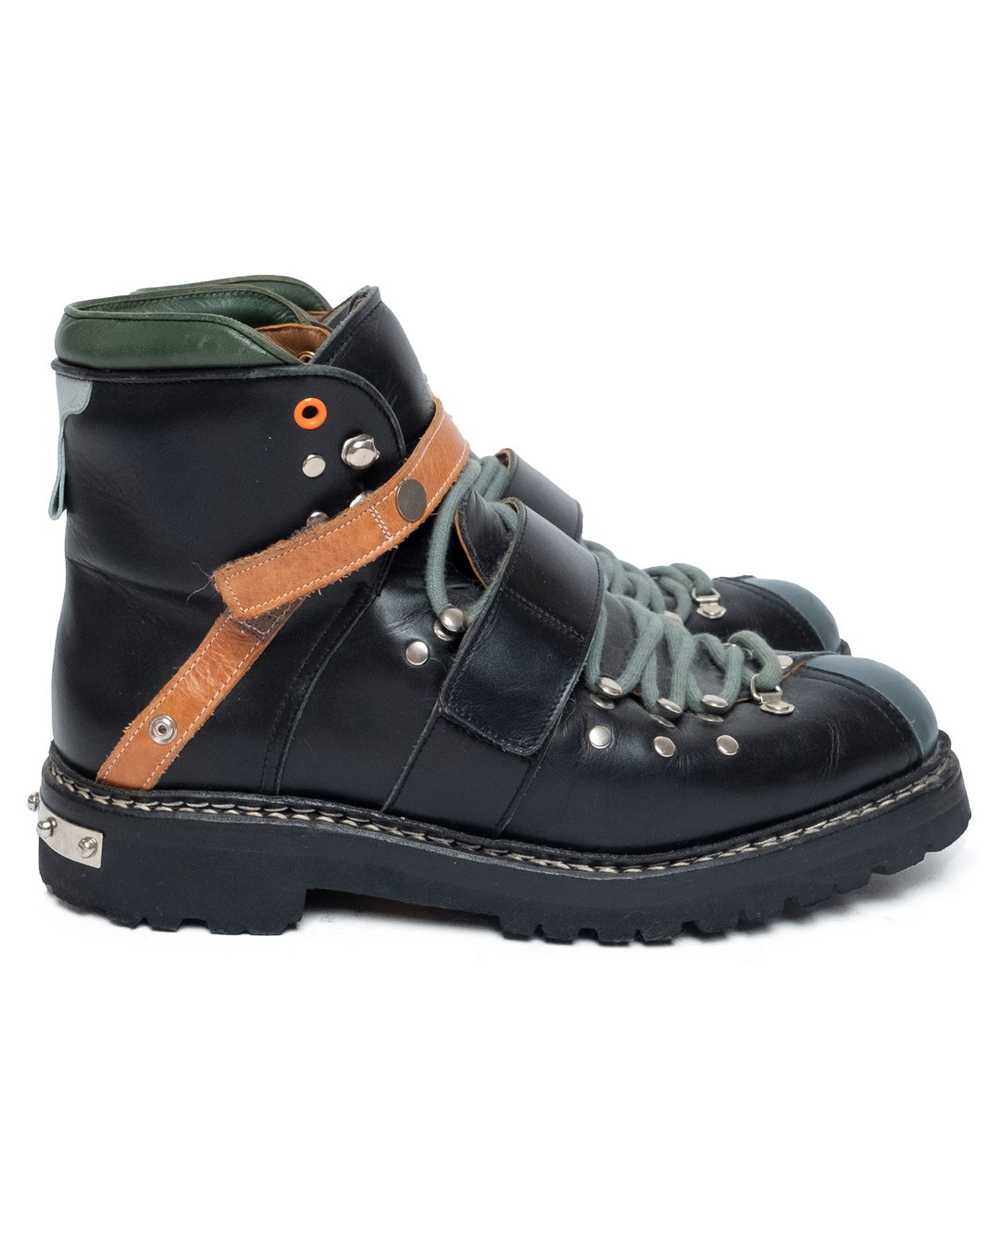 Undercover SS2010 "Less But Better" Hiking Boots - image 2